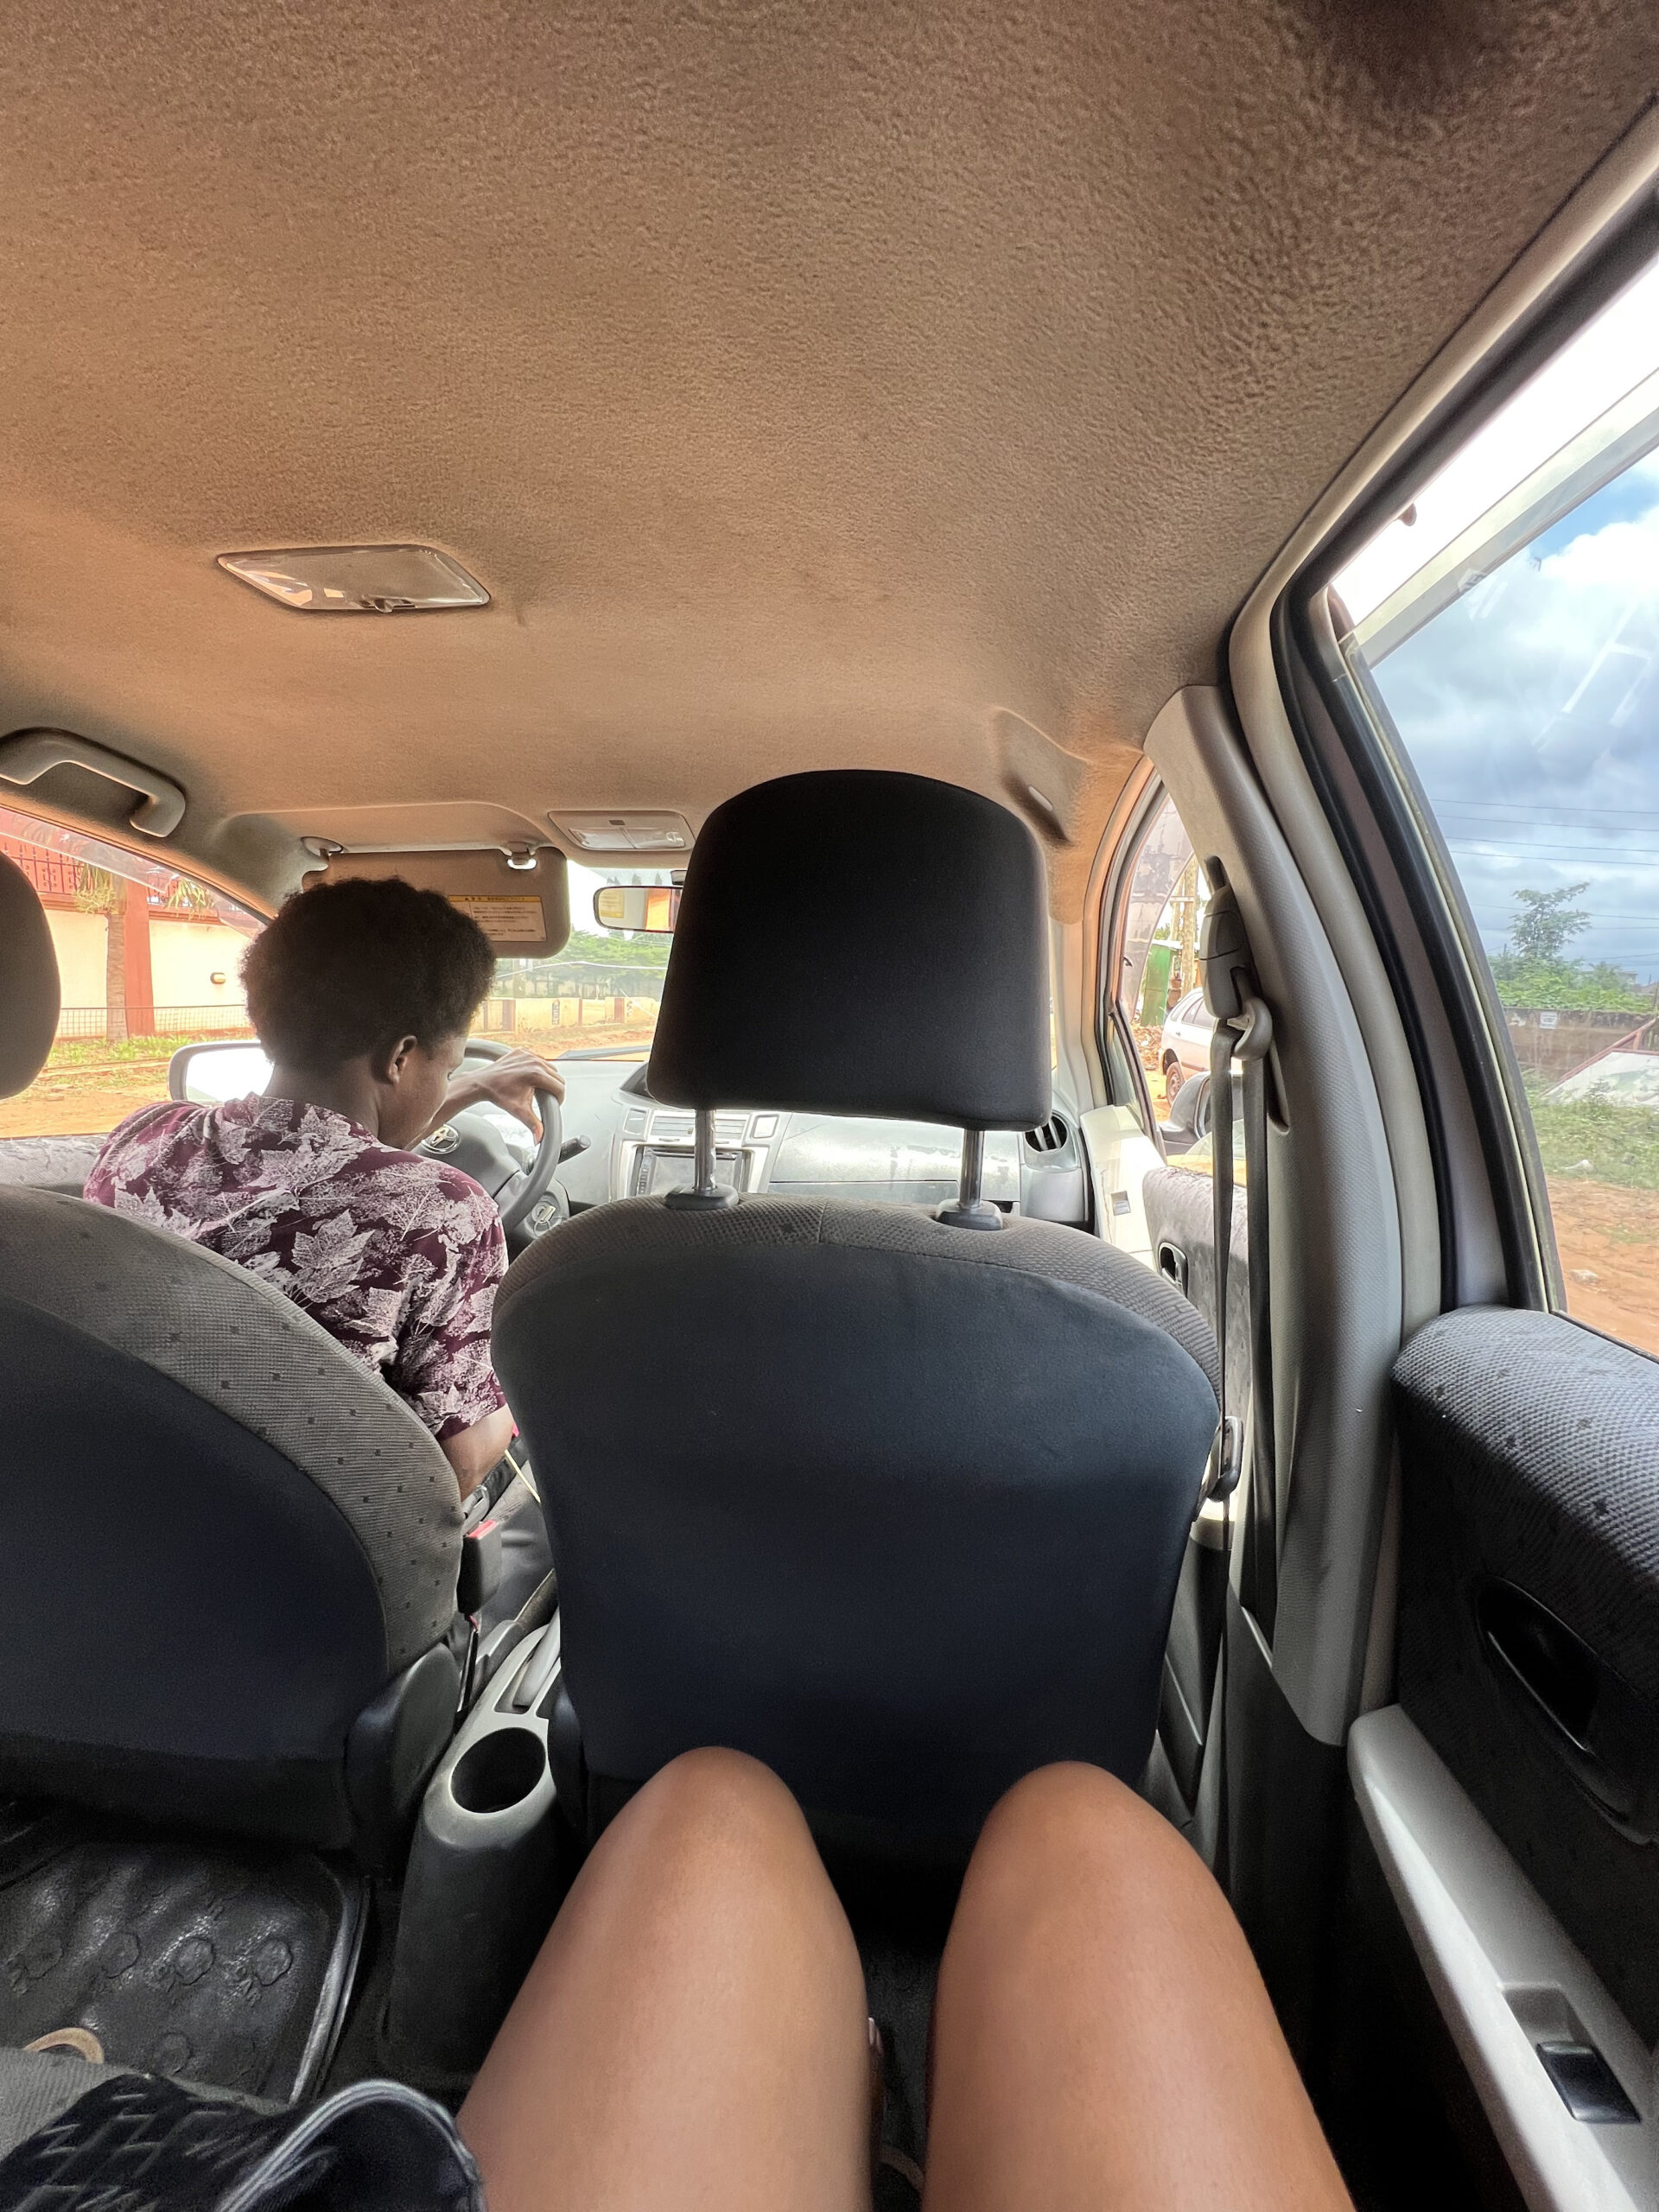 An image of legs in the back of an Uber. 